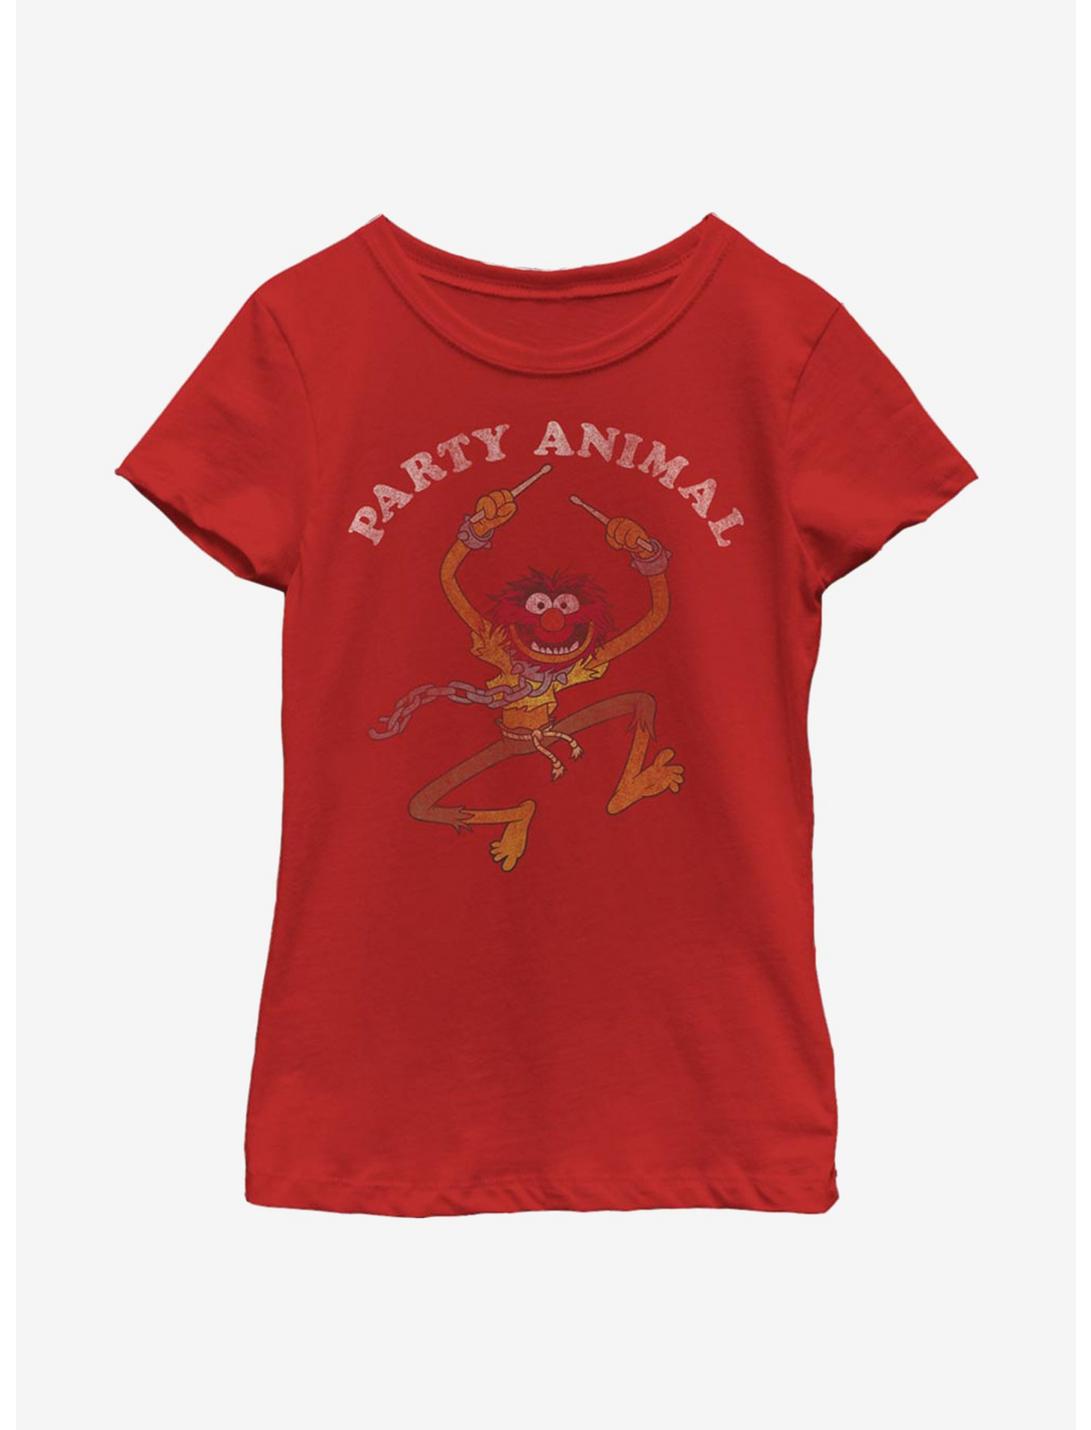 Disney The Muppets Party Animal Youth Girls T-Shirt, RED, hi-res